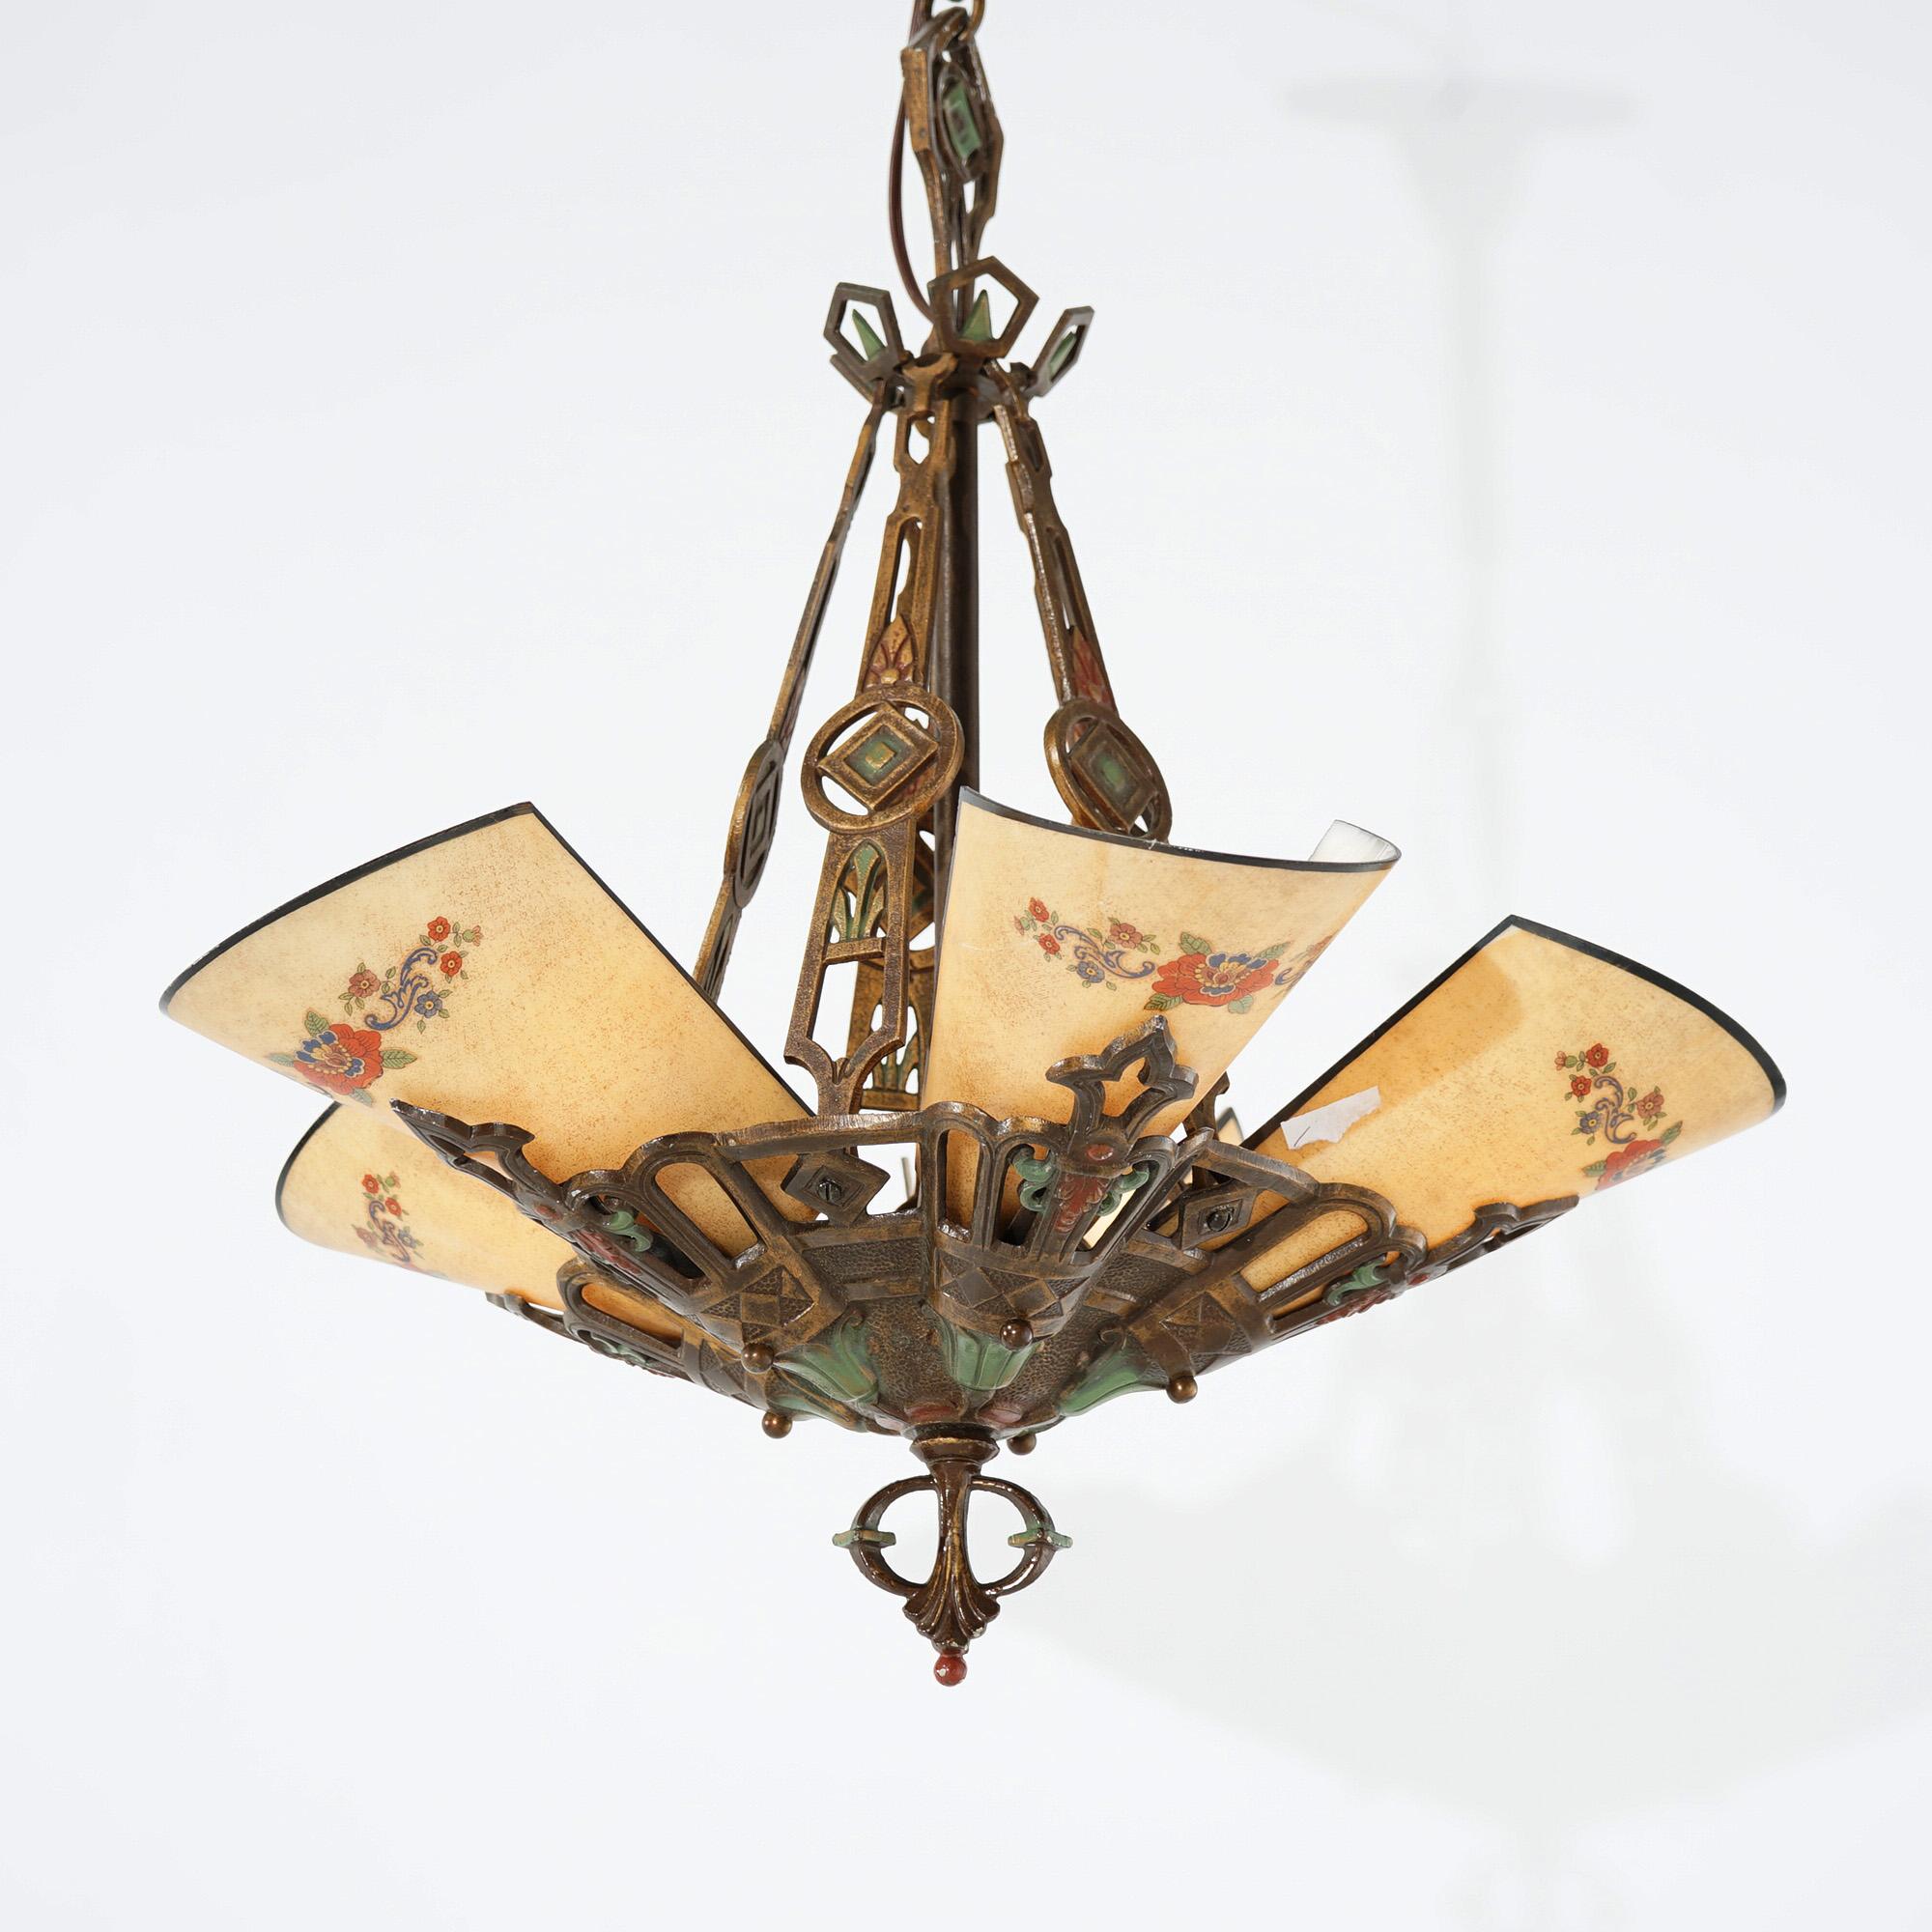 American Antique Art Deco Polychrome Hanging Fixture with Painted Slip Shades c1920